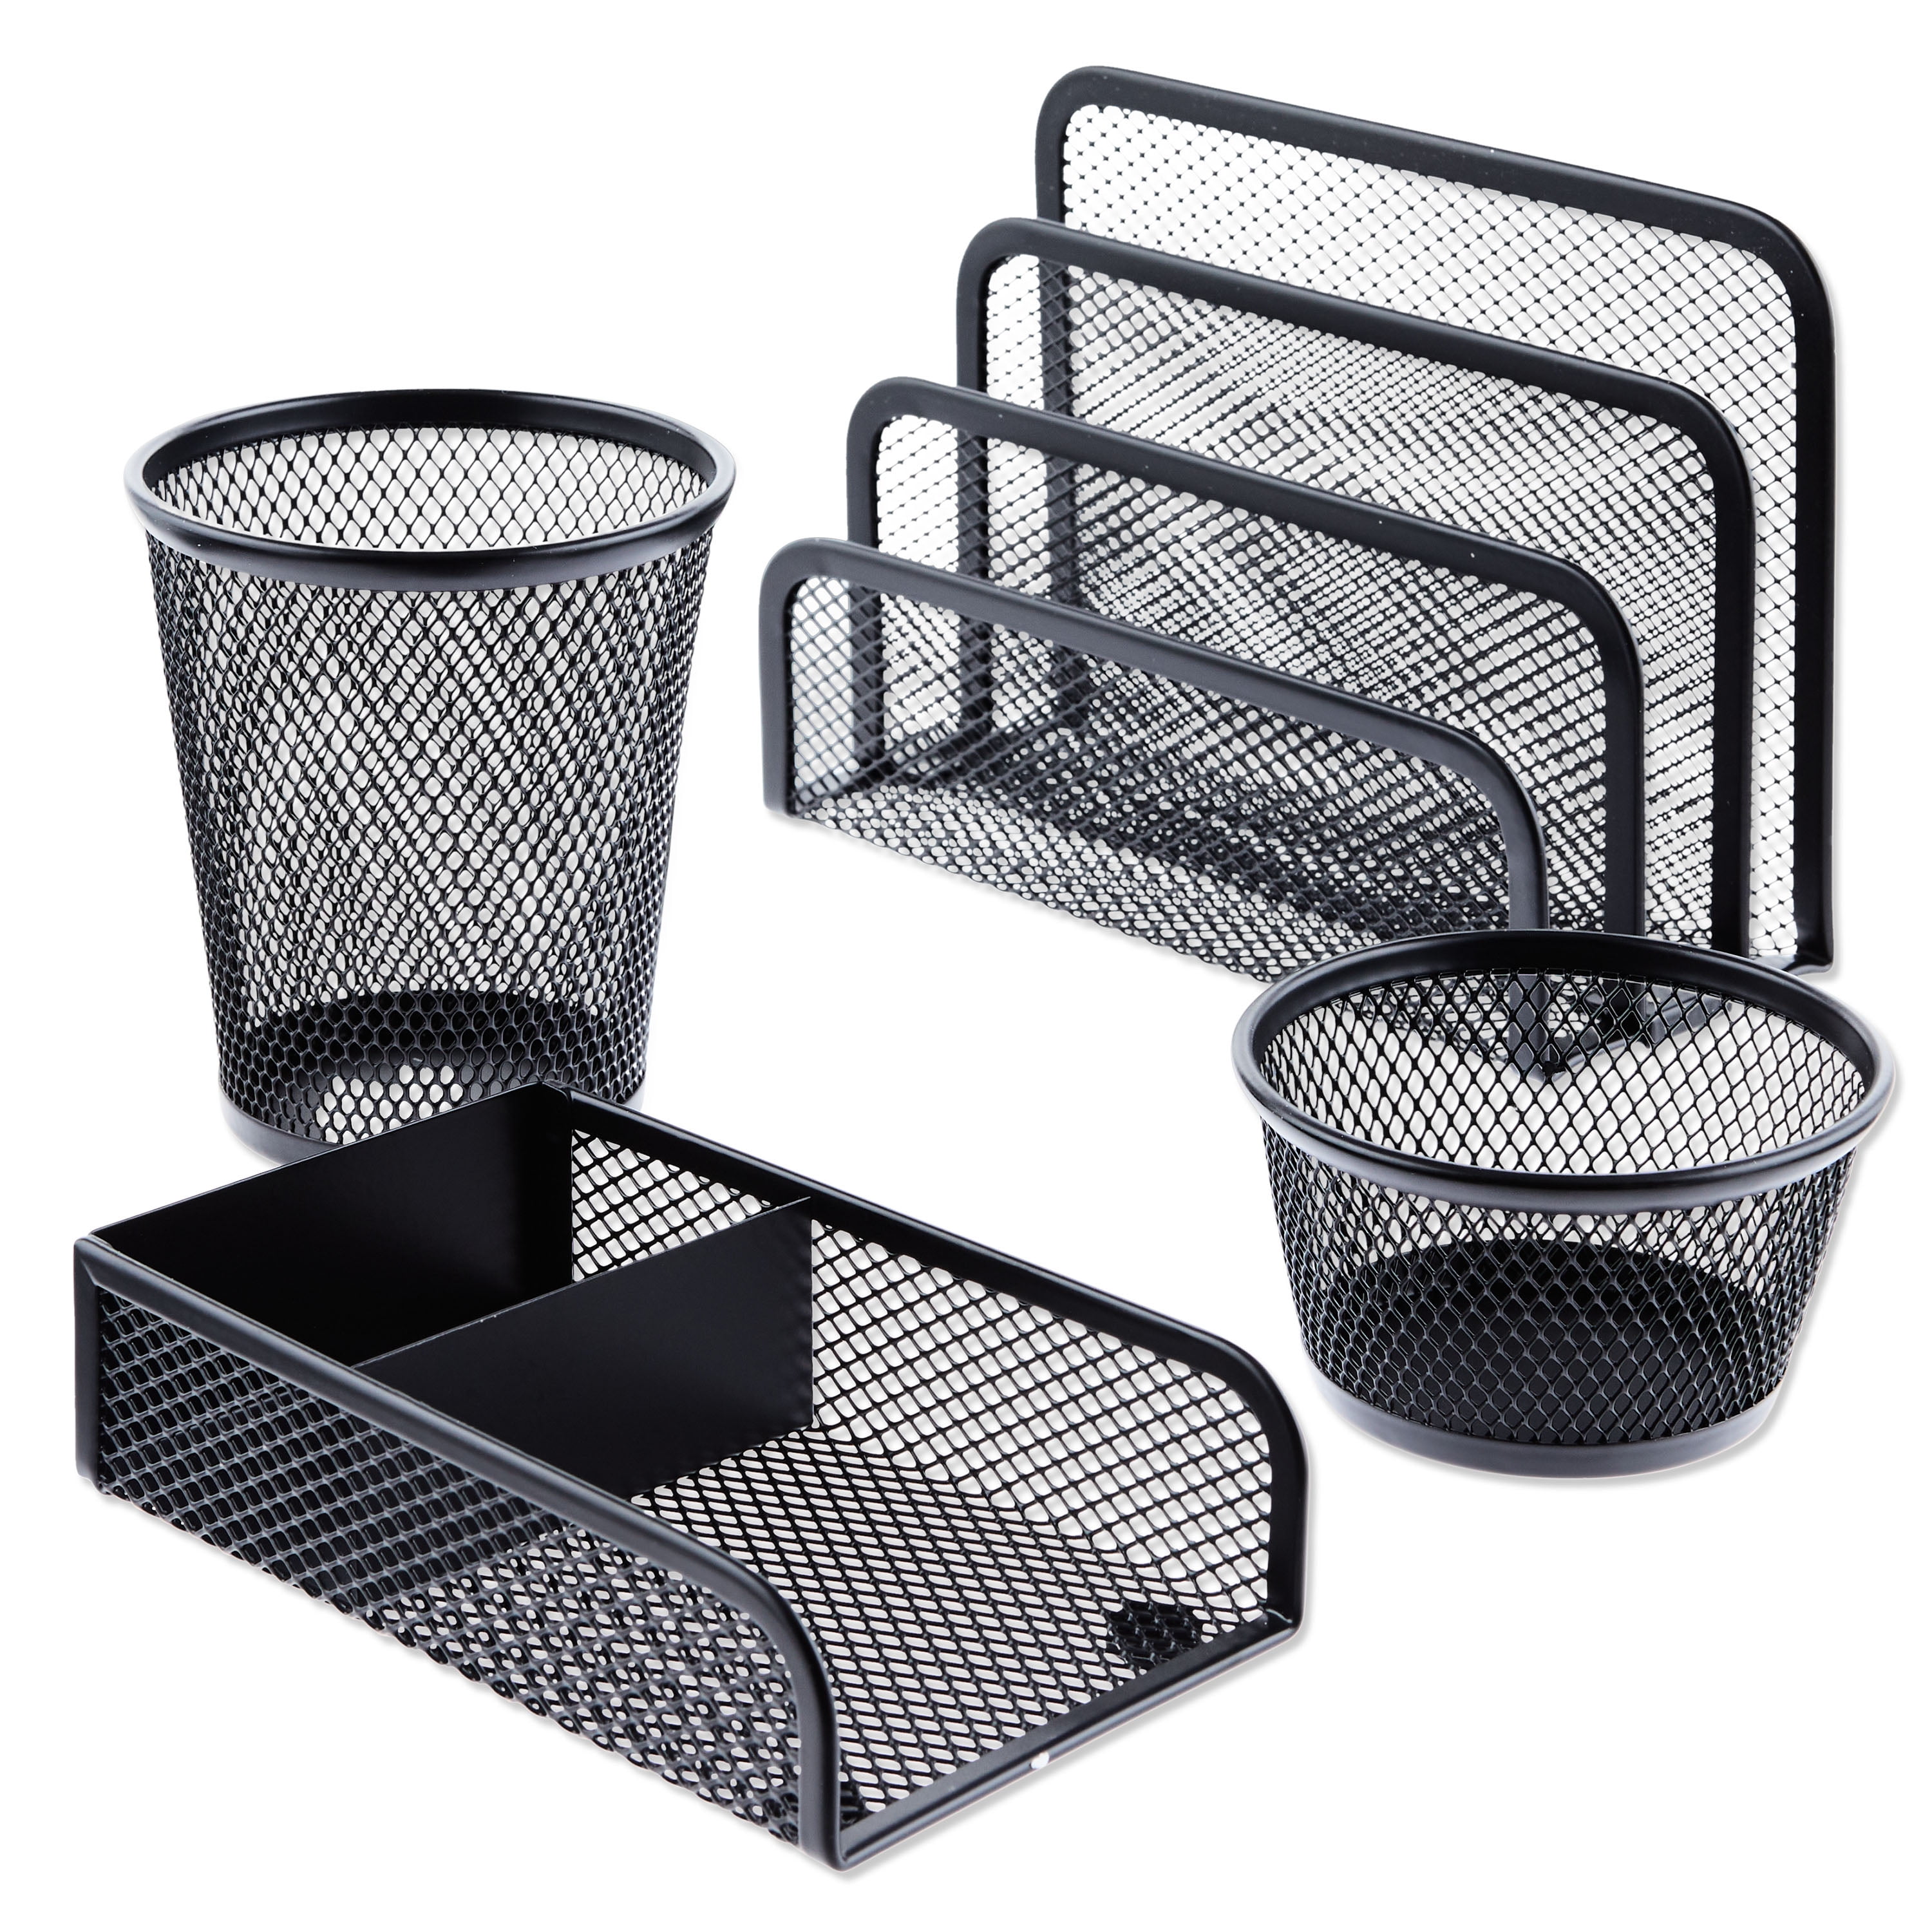 EXOFC Mesh Desk Organizer Set,Office Desk Accessories with Pen holder Paper  Clip Holder for Desk,Office Supplies Caddy Great for Home School (Black)